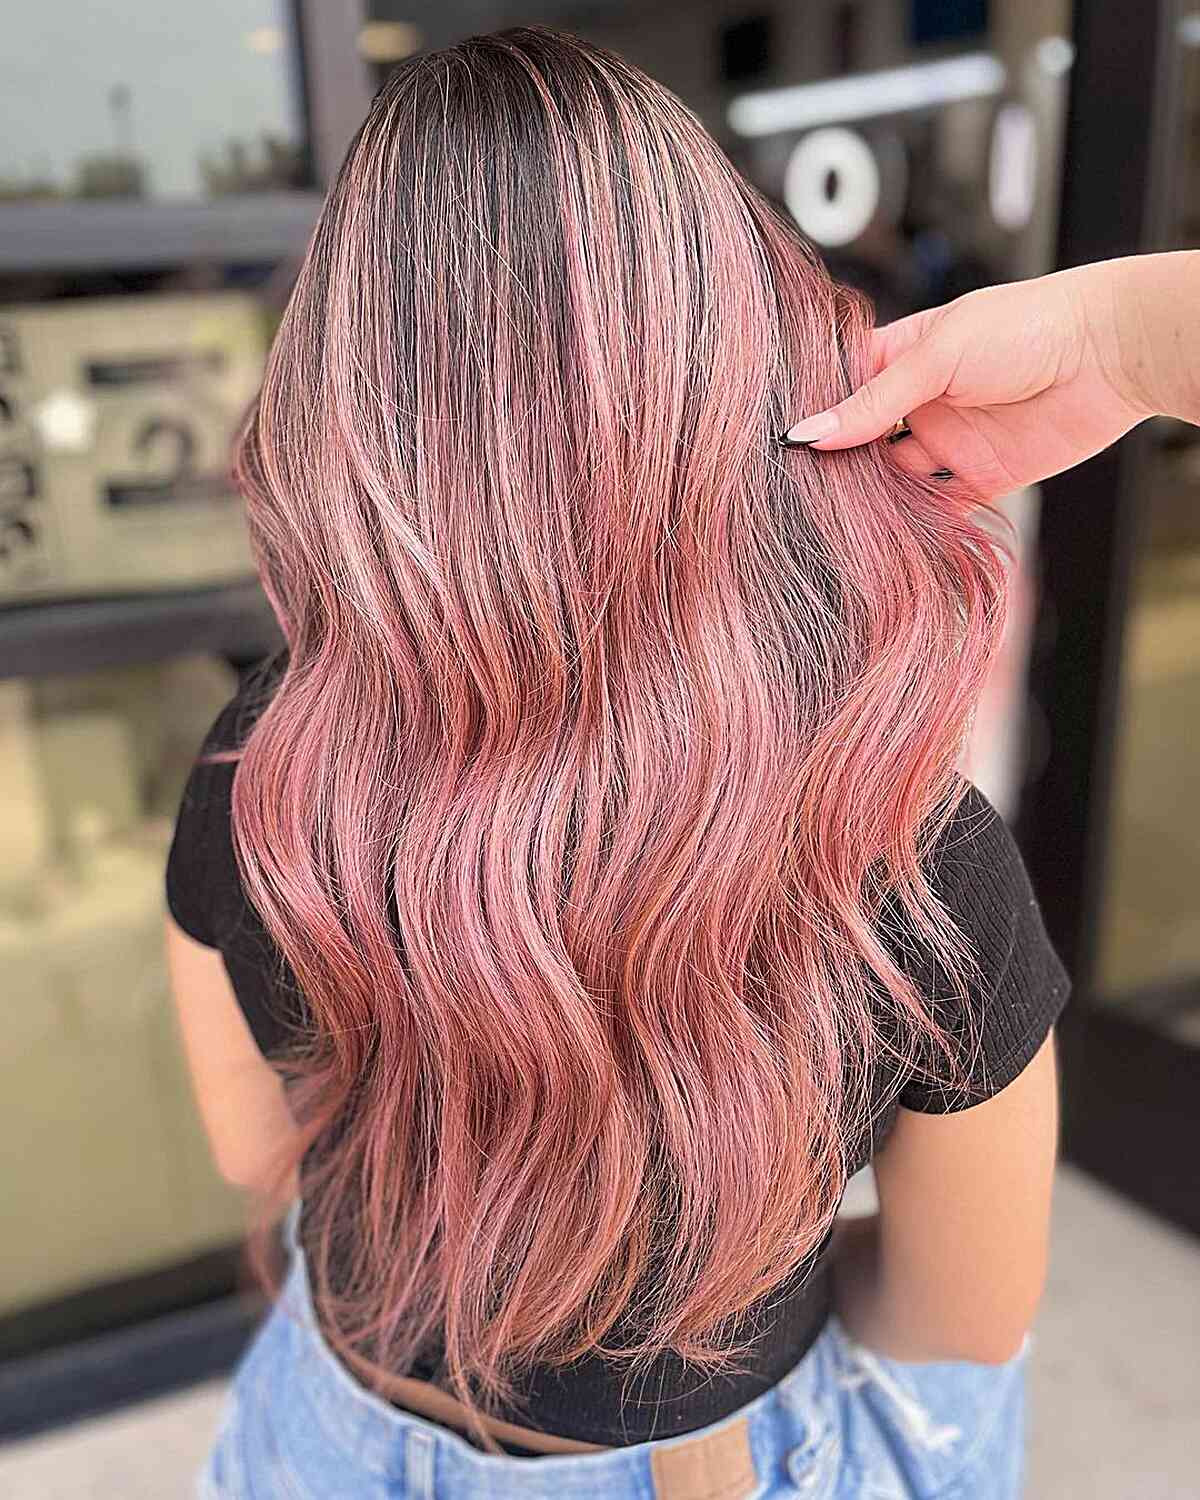 Dark Rooted Cotton Candy Pink Hair for ladies with long hair